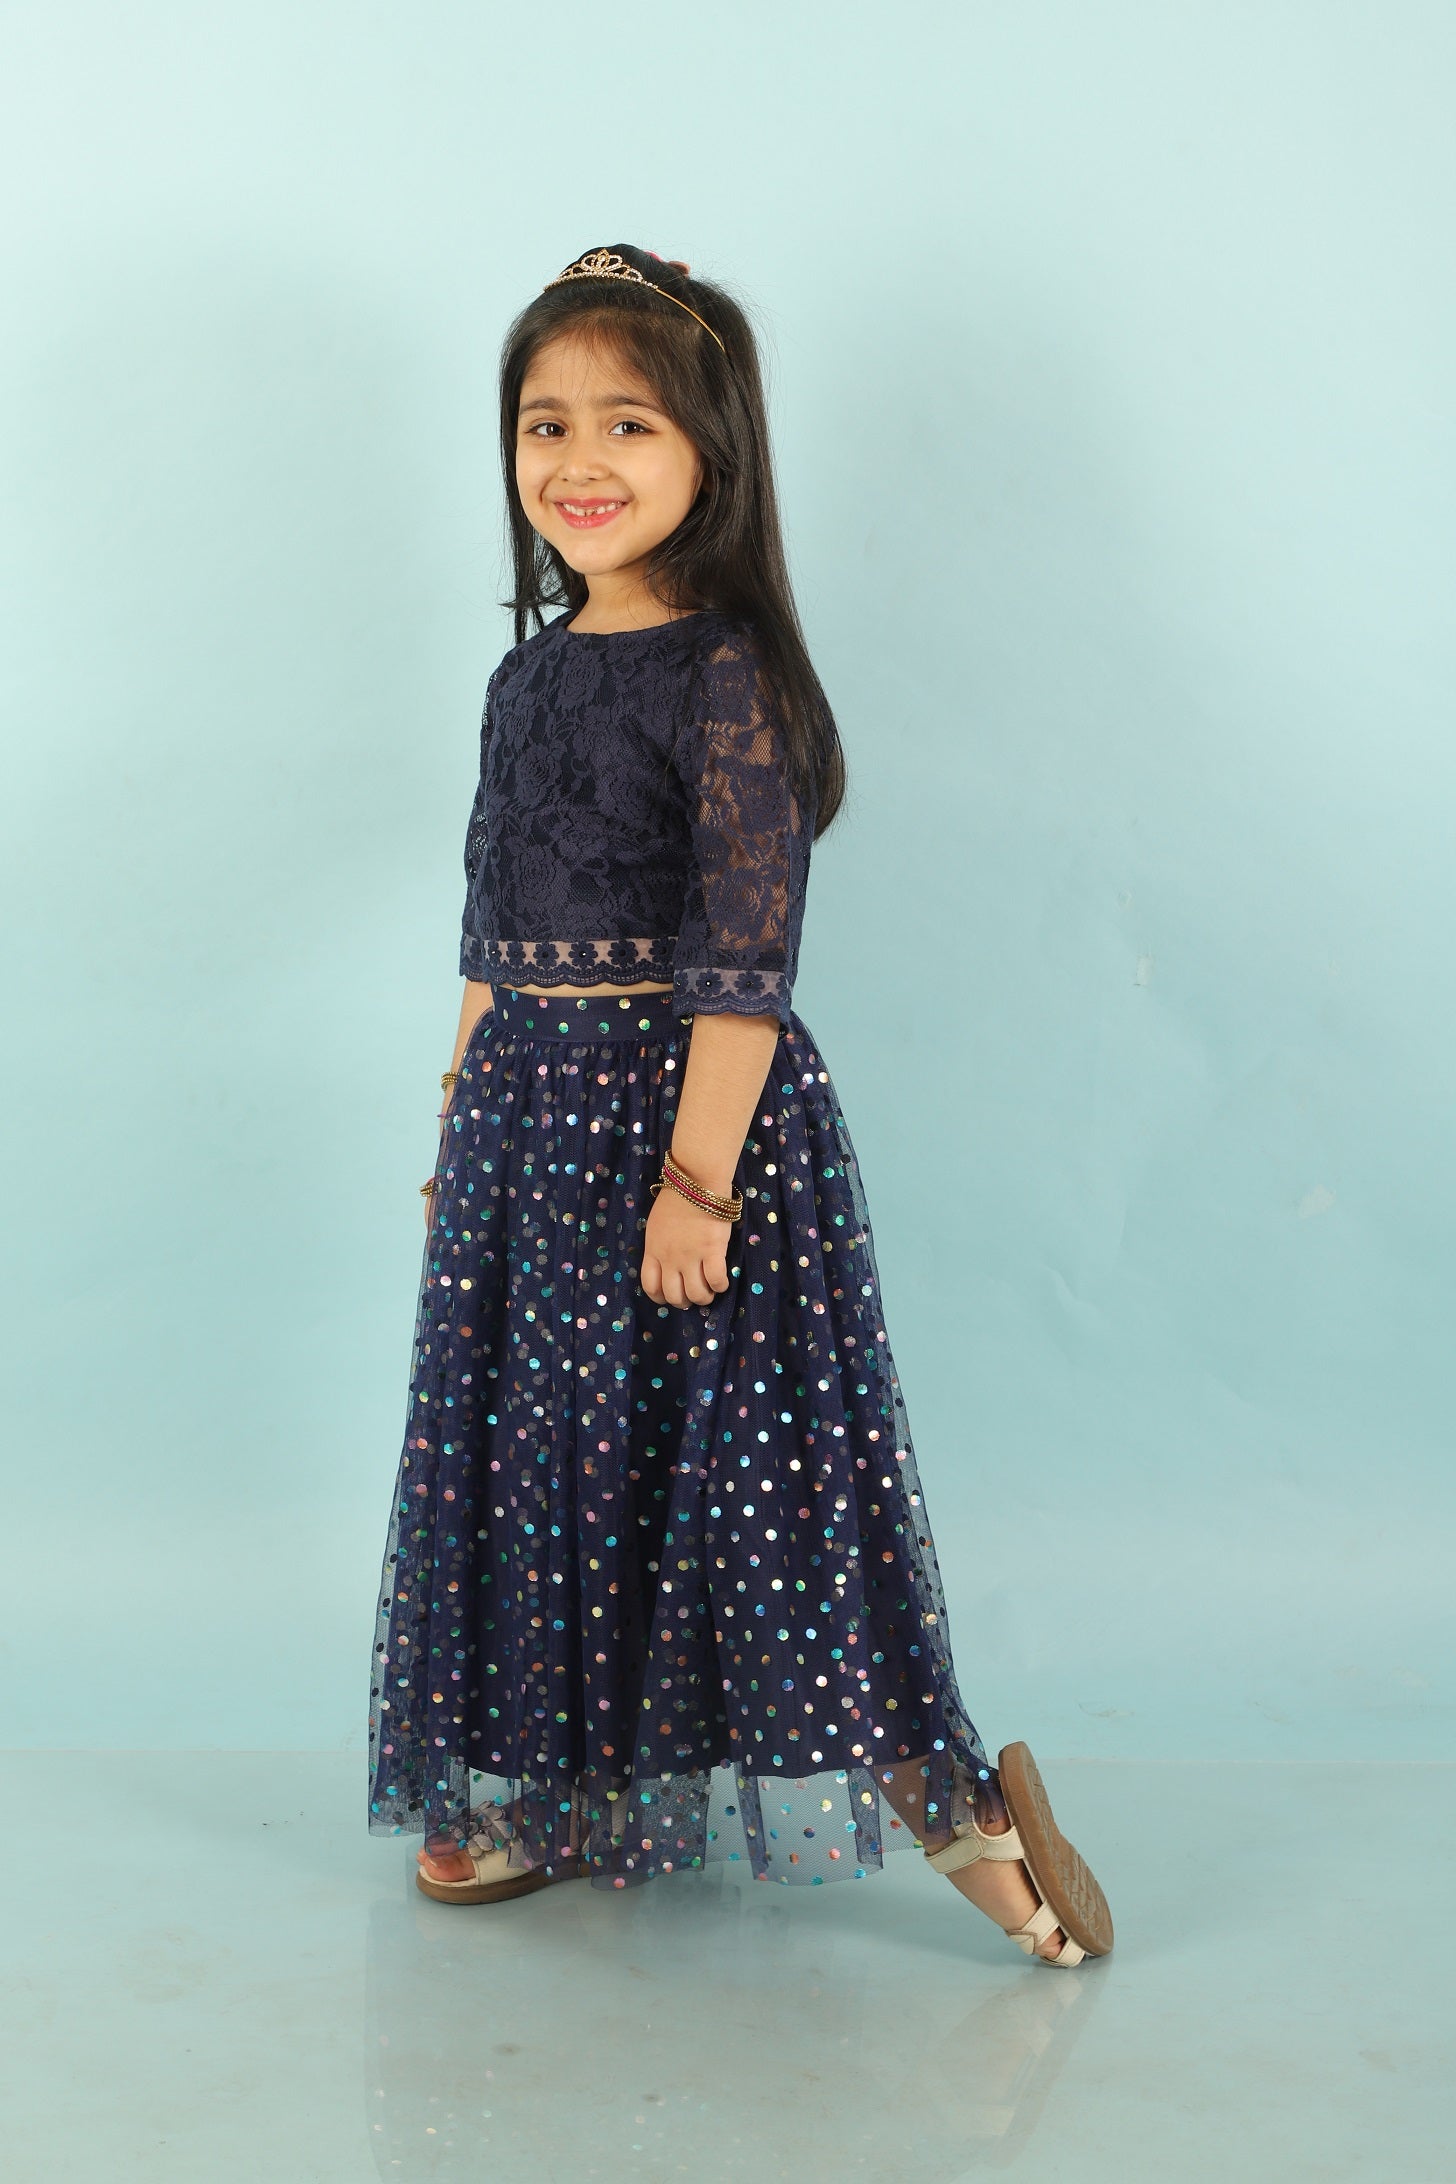 Girl's Lace Top With Organzar Embroidered Lace Details, Mesh With Rainbow Foil Print-Navy - Lil Peacock